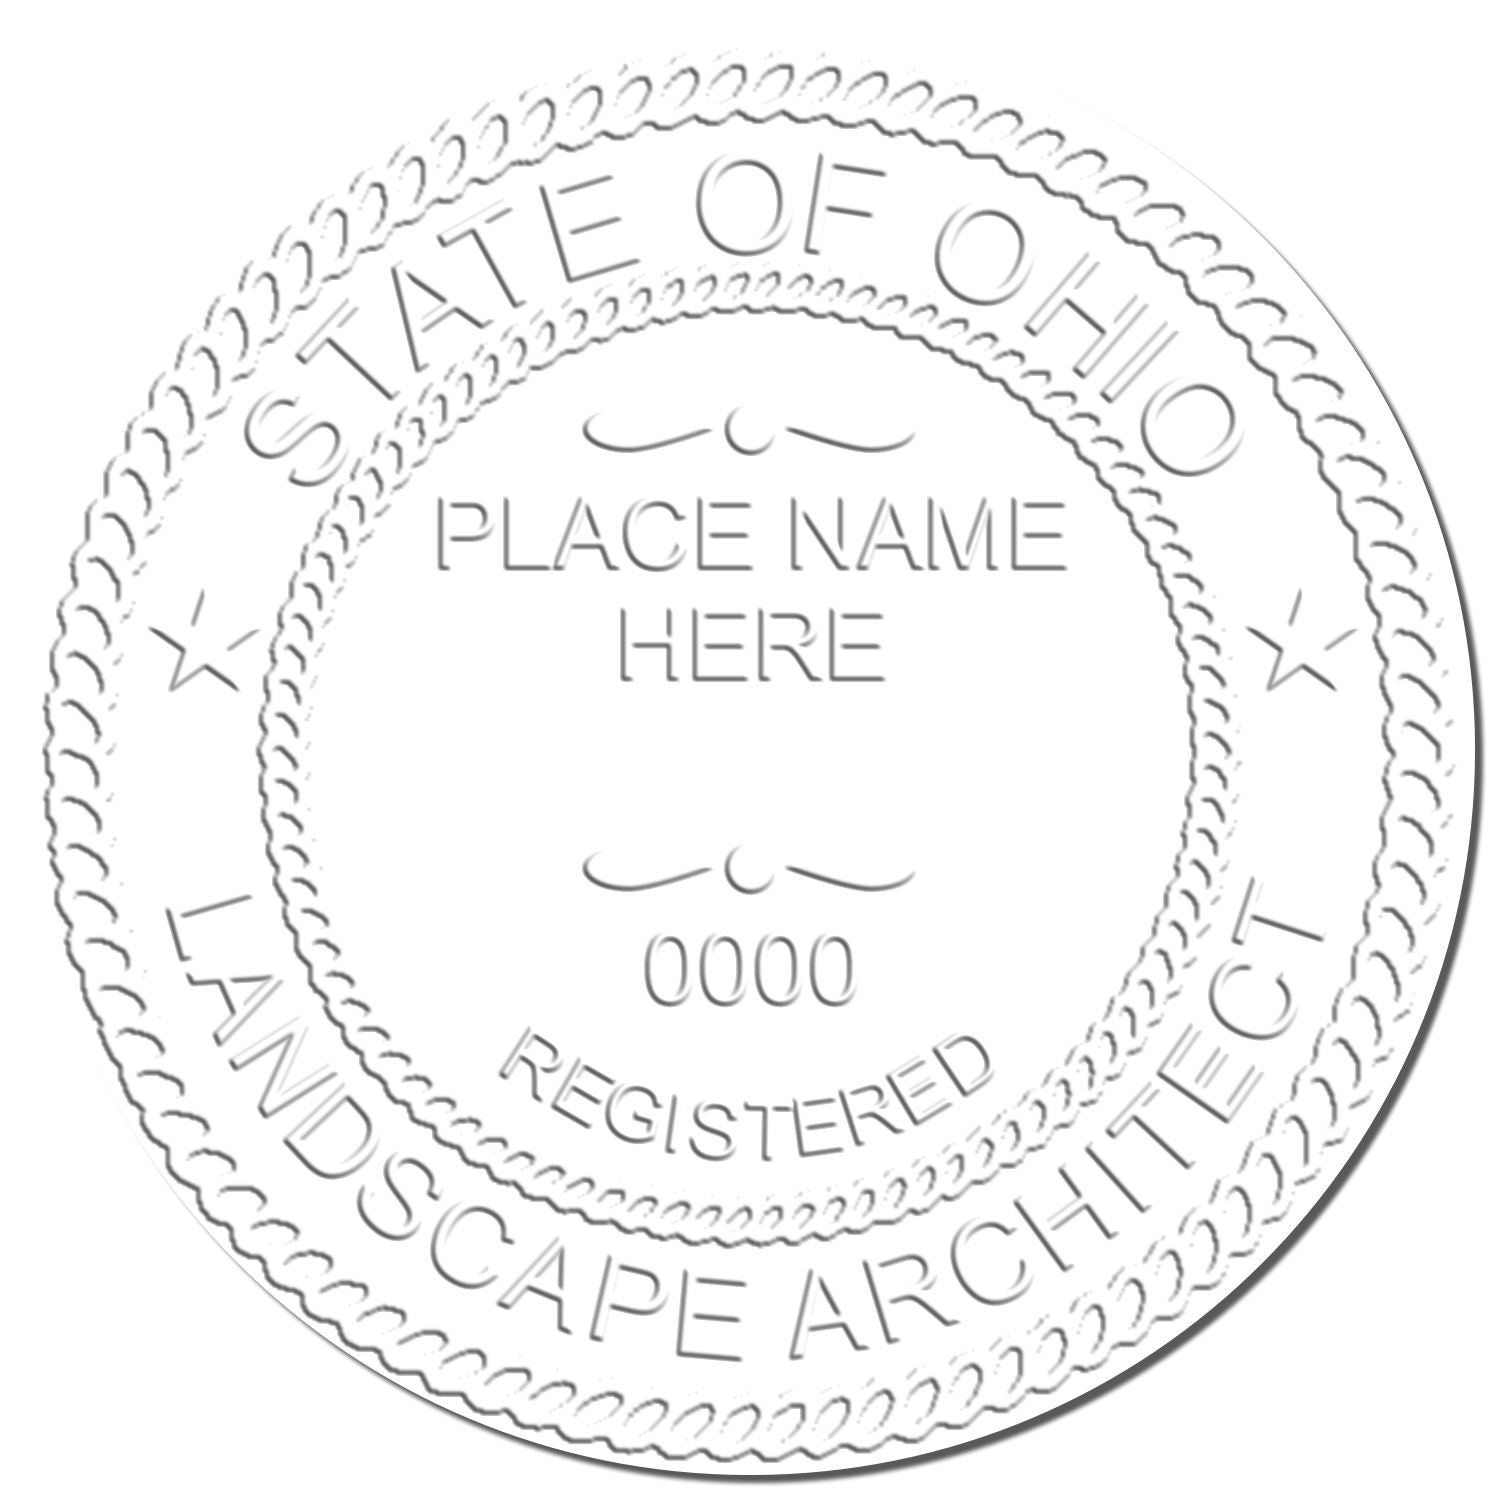 This paper is stamped with a sample imprint of the Ohio Long Reach Landscape Architect Embossing Stamp, signifying its quality and reliability.